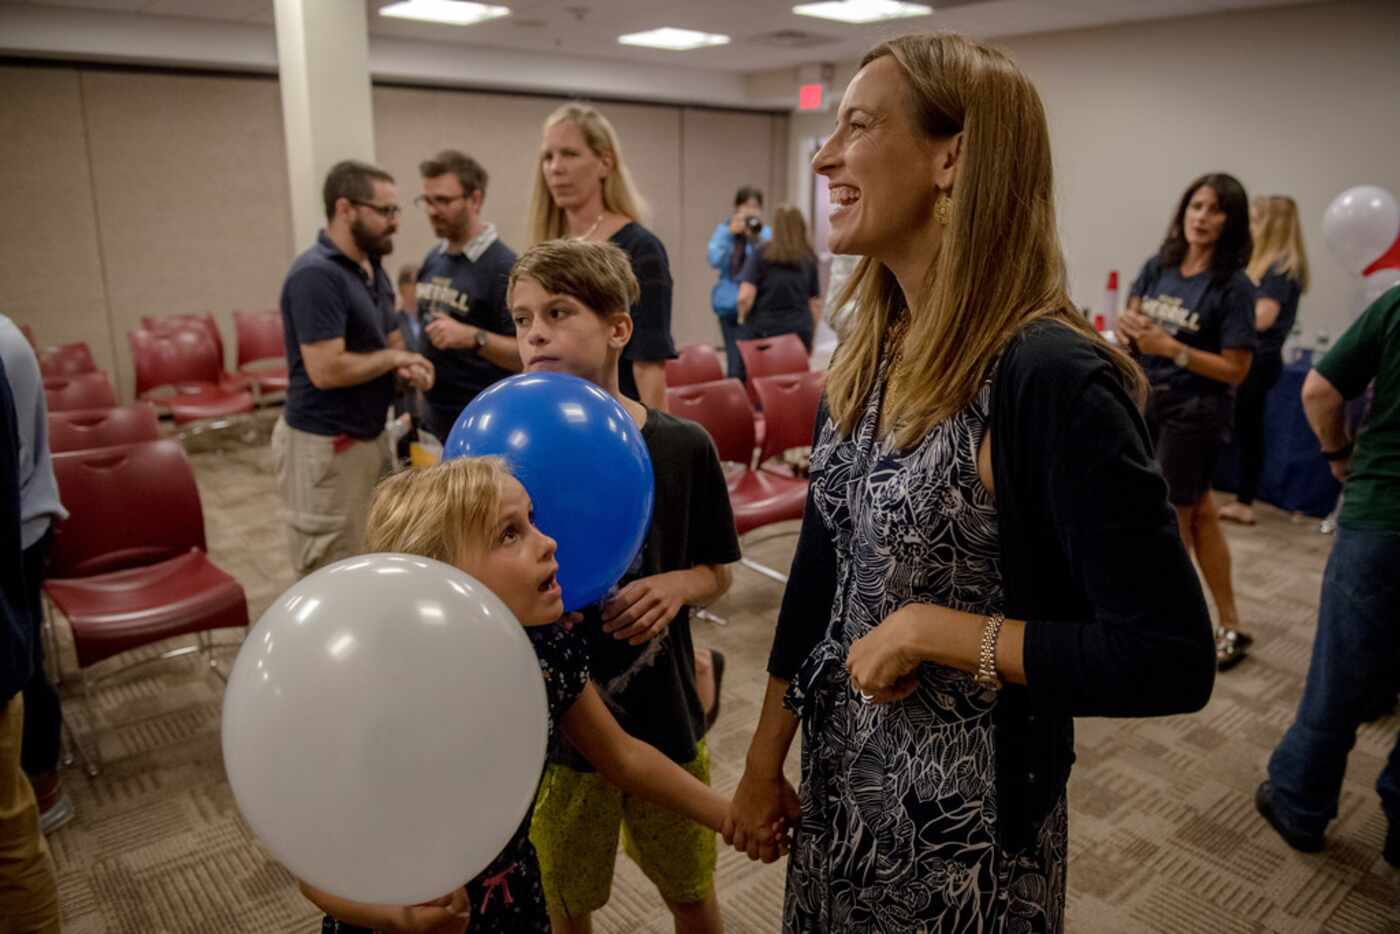 Mikie Sherrill, a Democrat running for Congress in New Jersey's 11th district, greets voters...